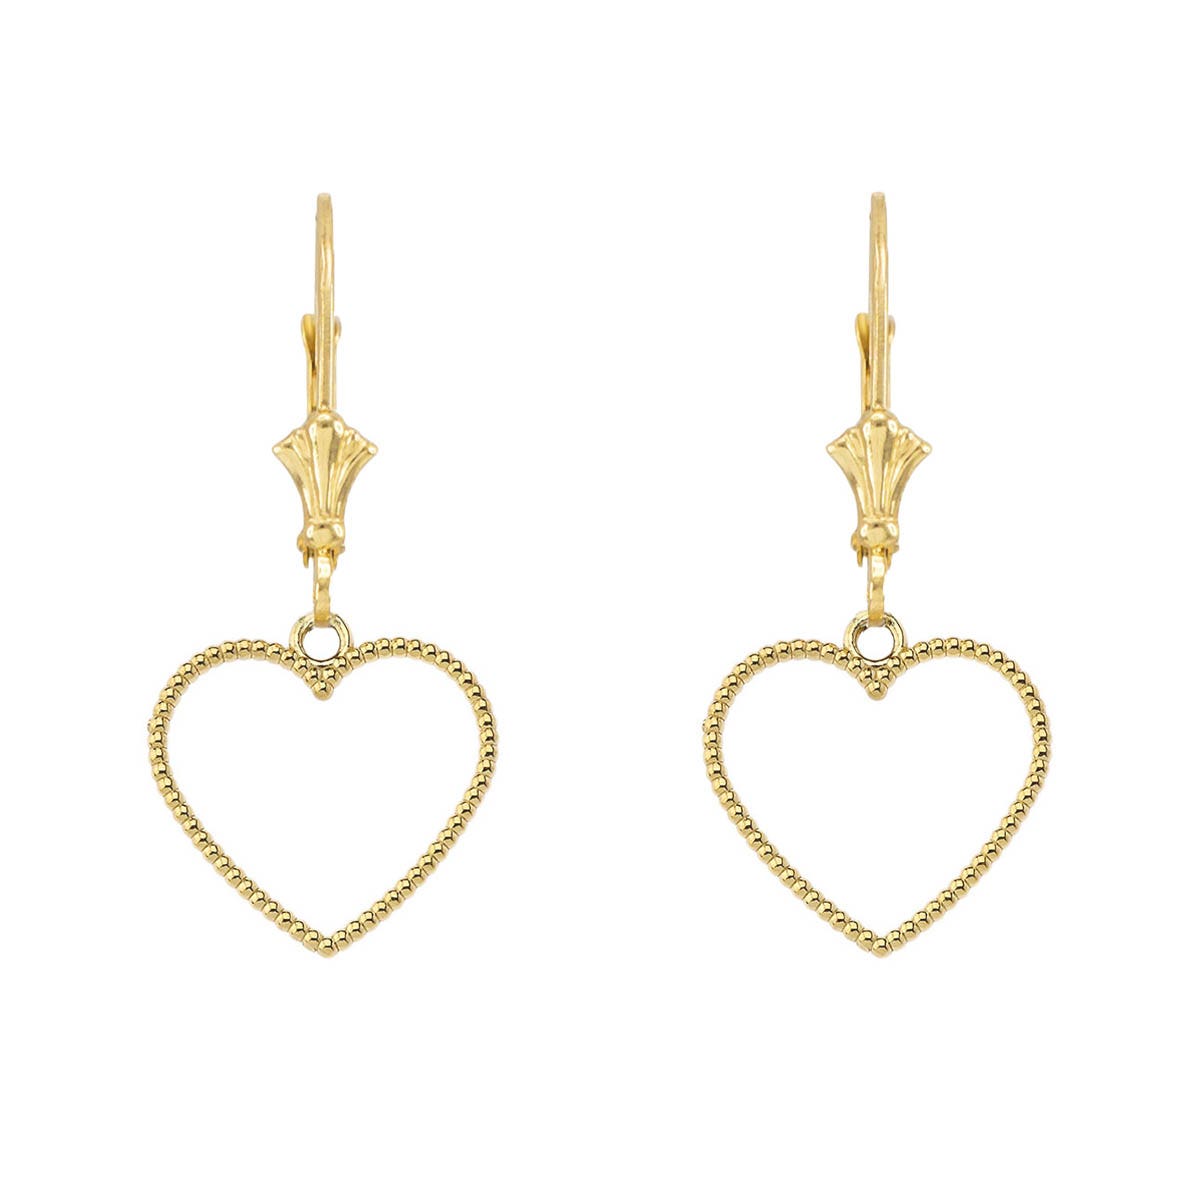 Gold Boutique - Gent Earrings Gold GOOFASH